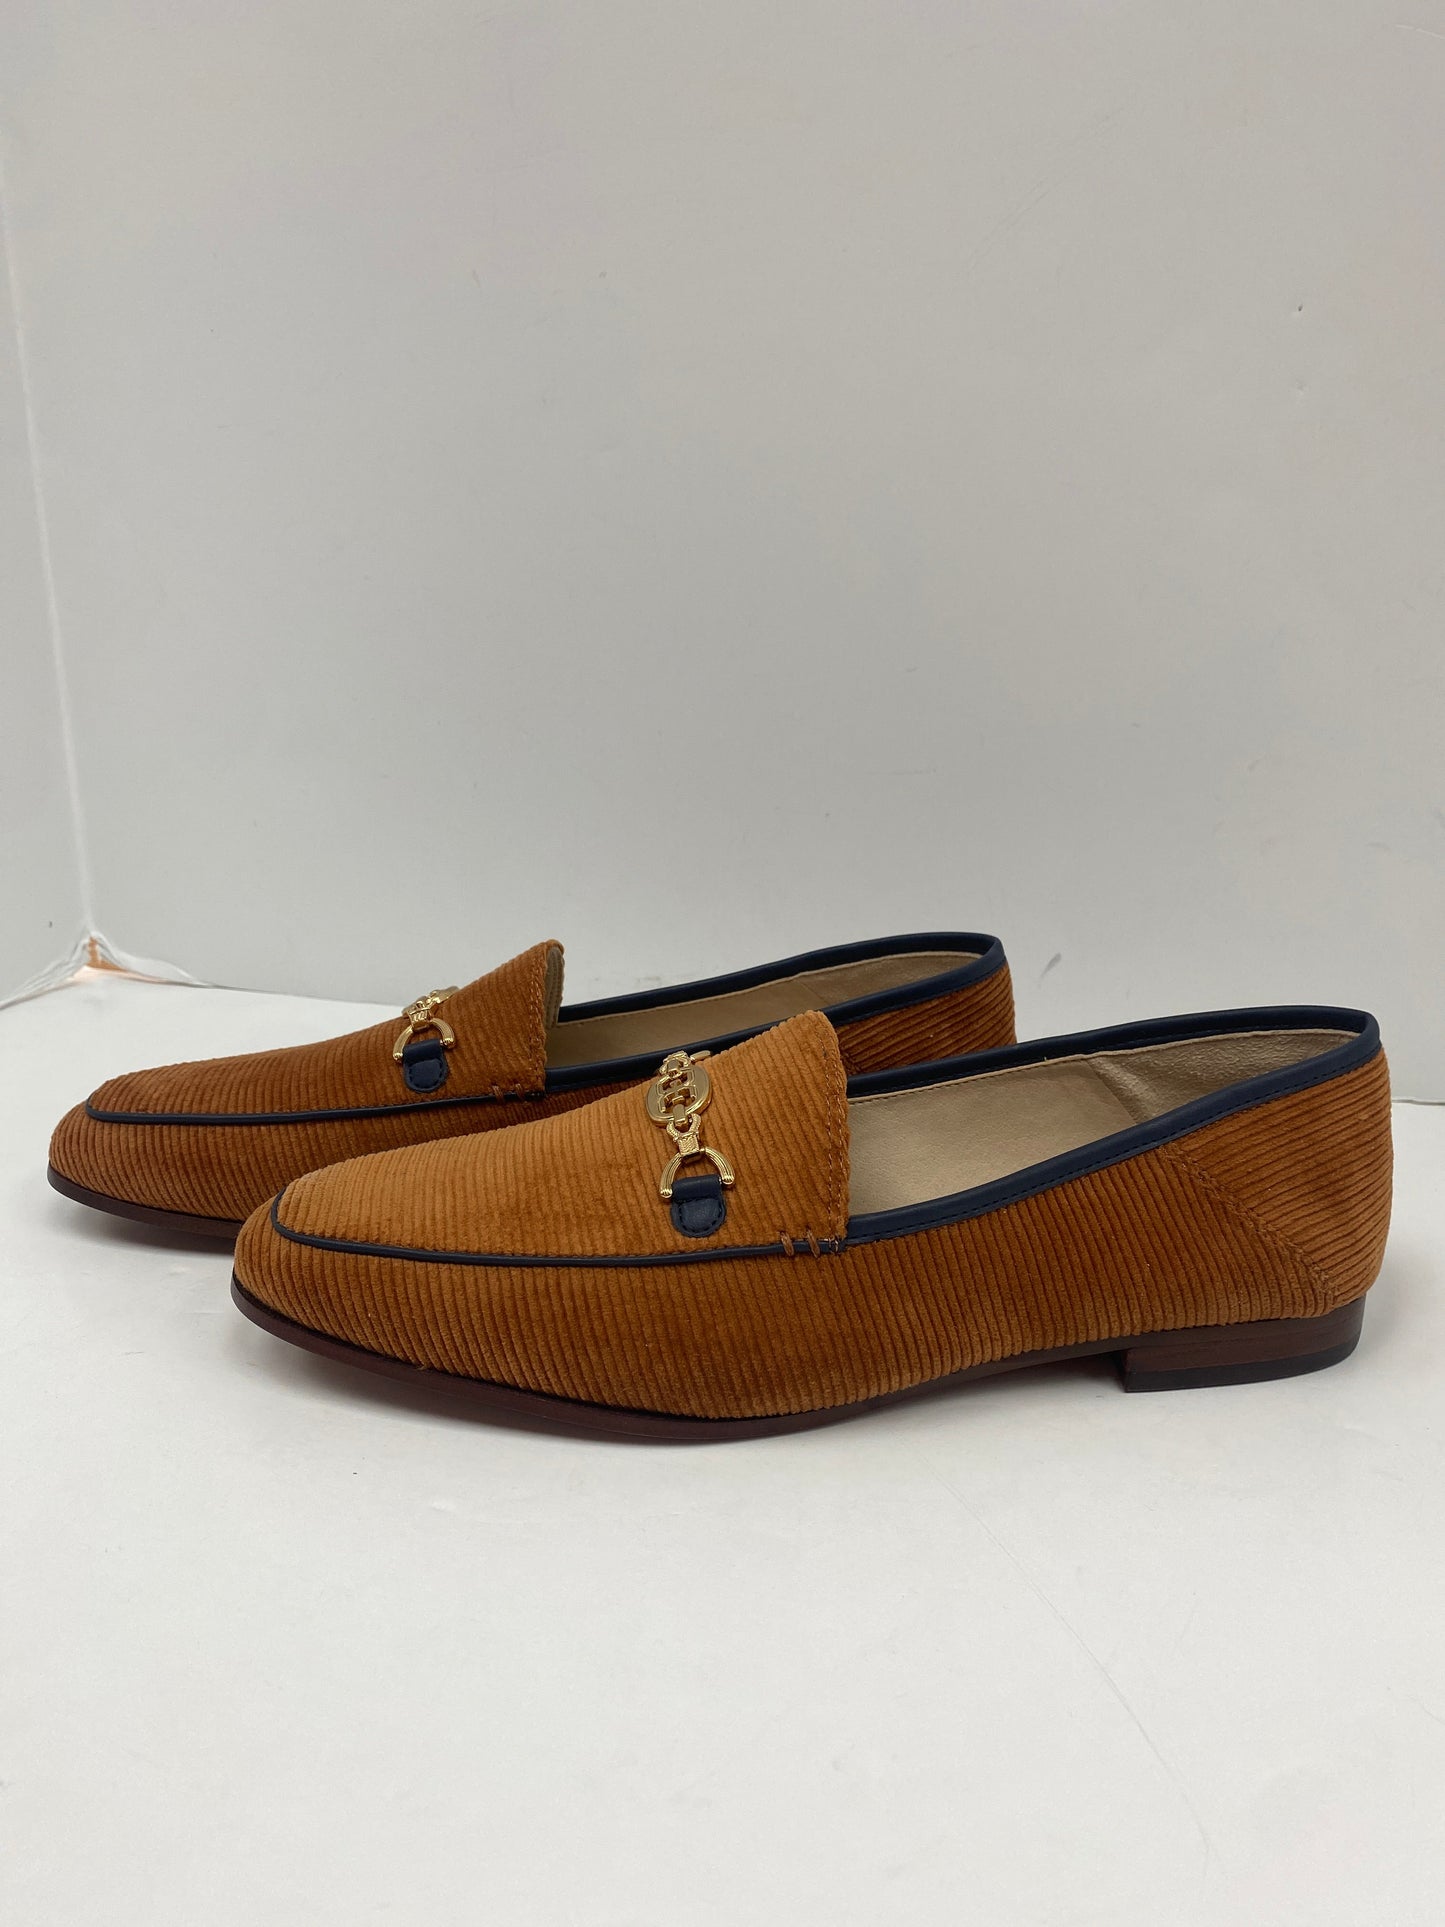 Shoes Flats Loafer Oxford By Sam Edelman  Size: 9.5